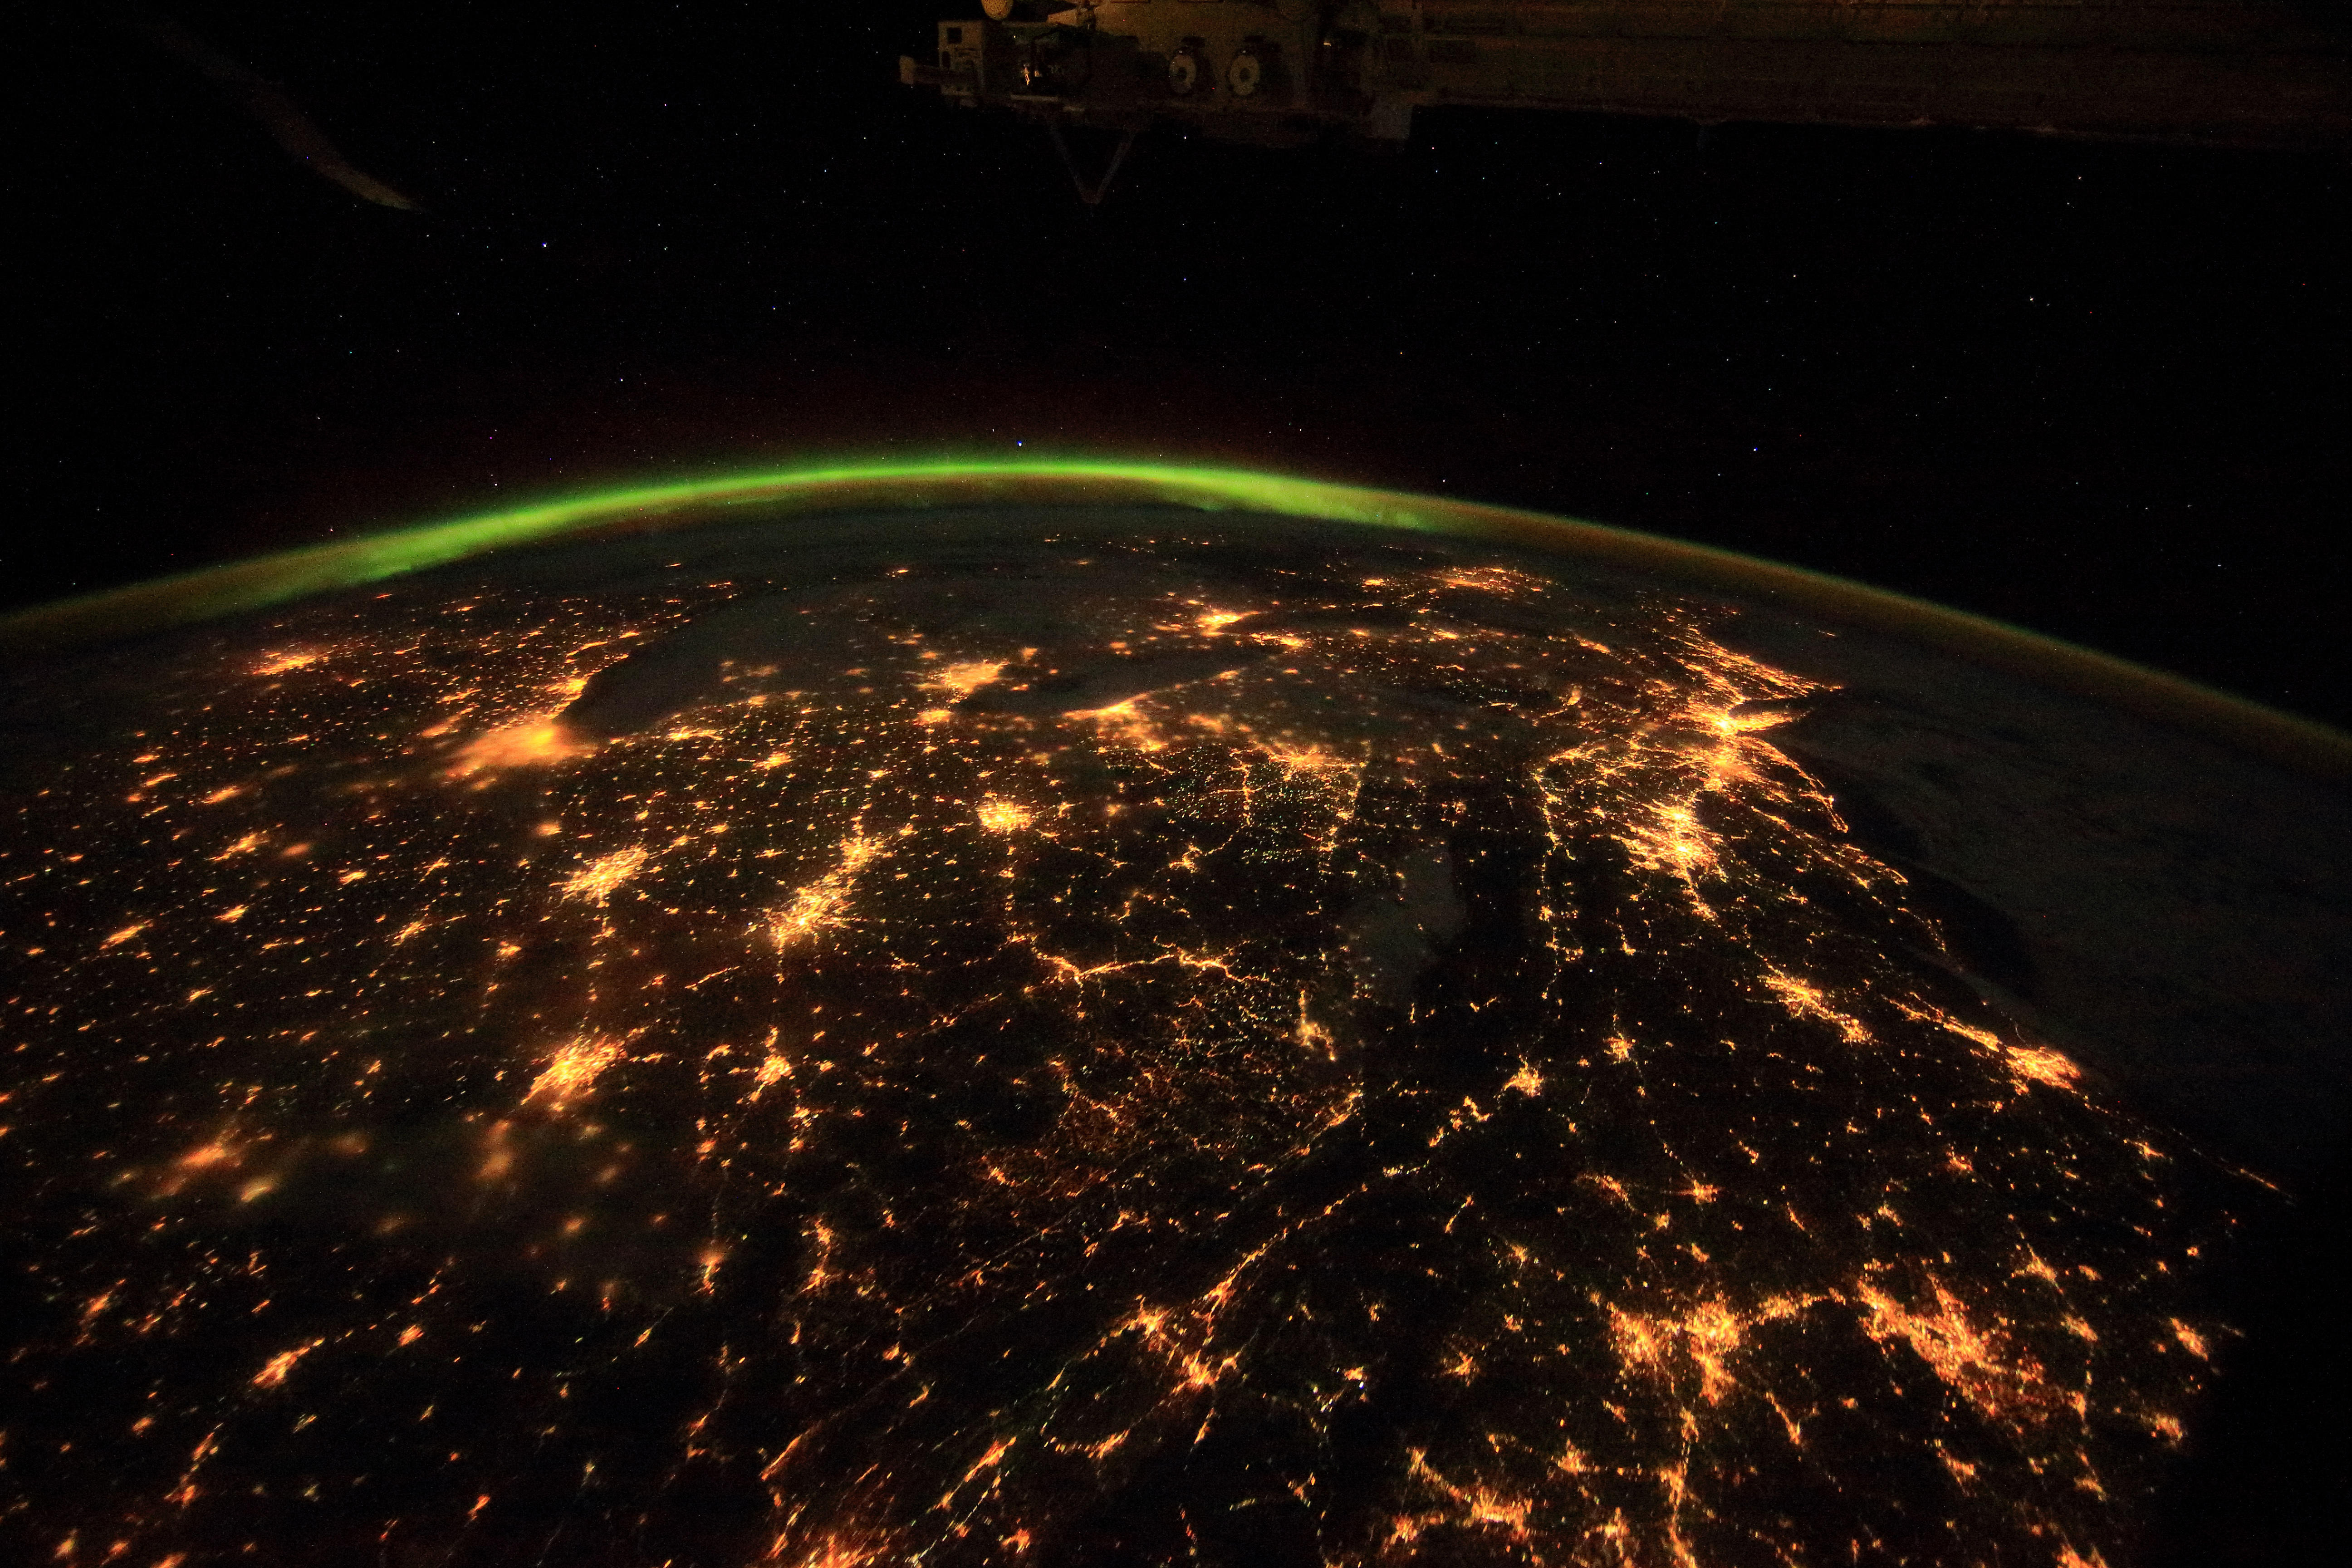 The entire northeast of Canada, the United States and beyond as seen from the International Space Station.